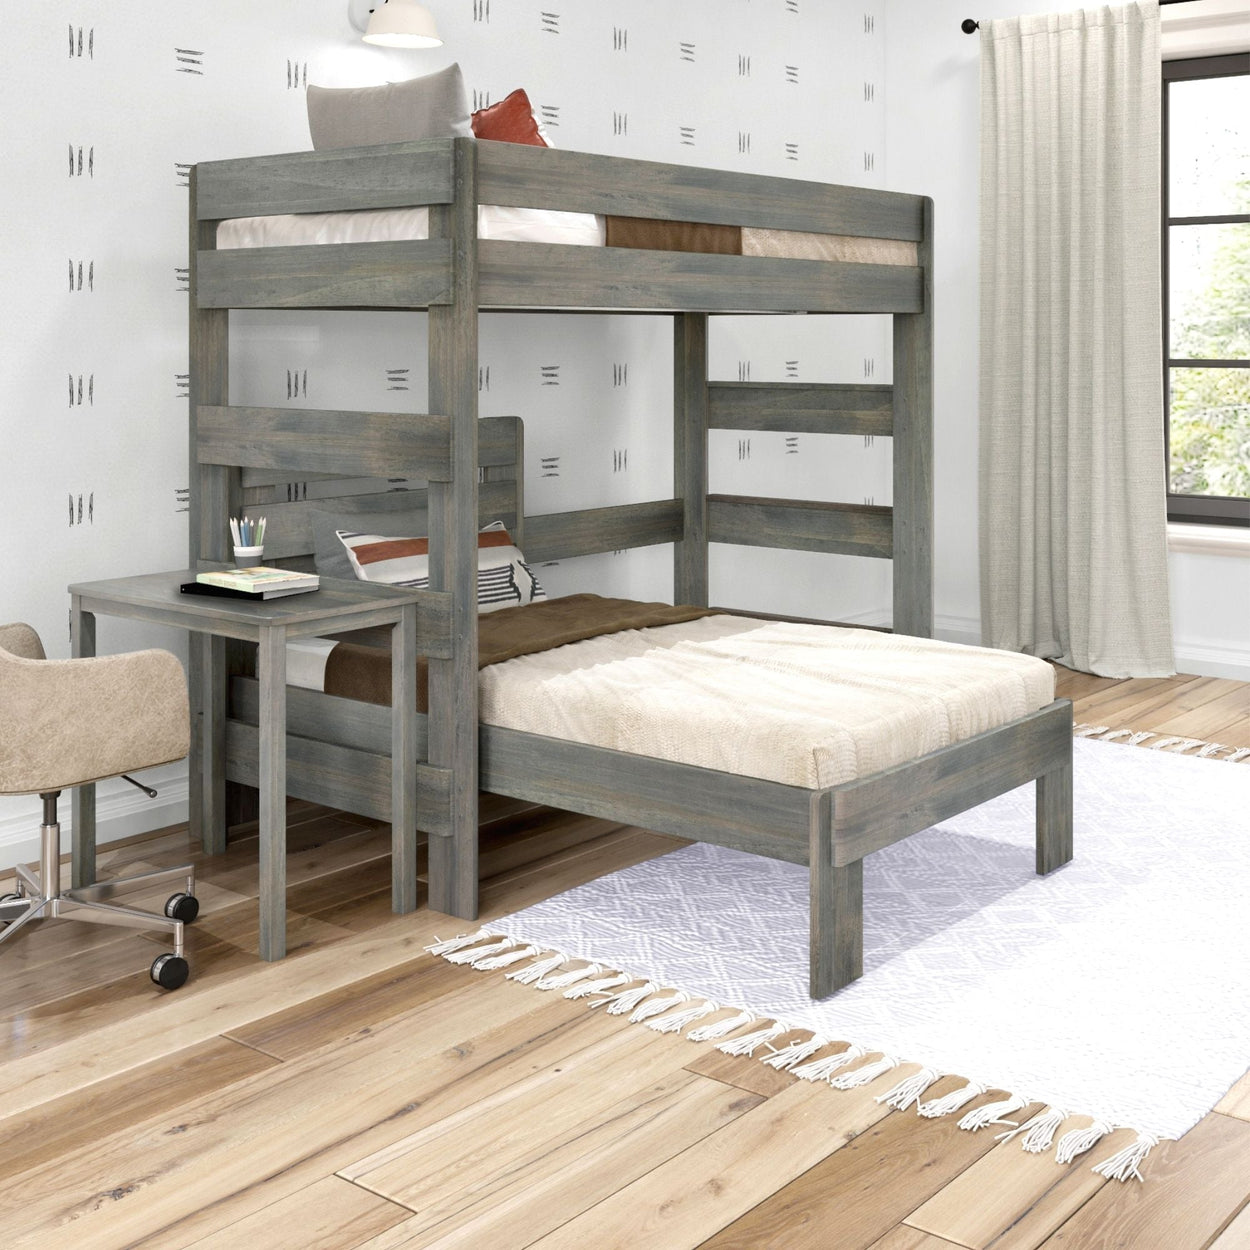 Rustic Twin over Twin L-Shaped Bunk Bed + Desk Bunk Beds Plank+Beam Driftwood 